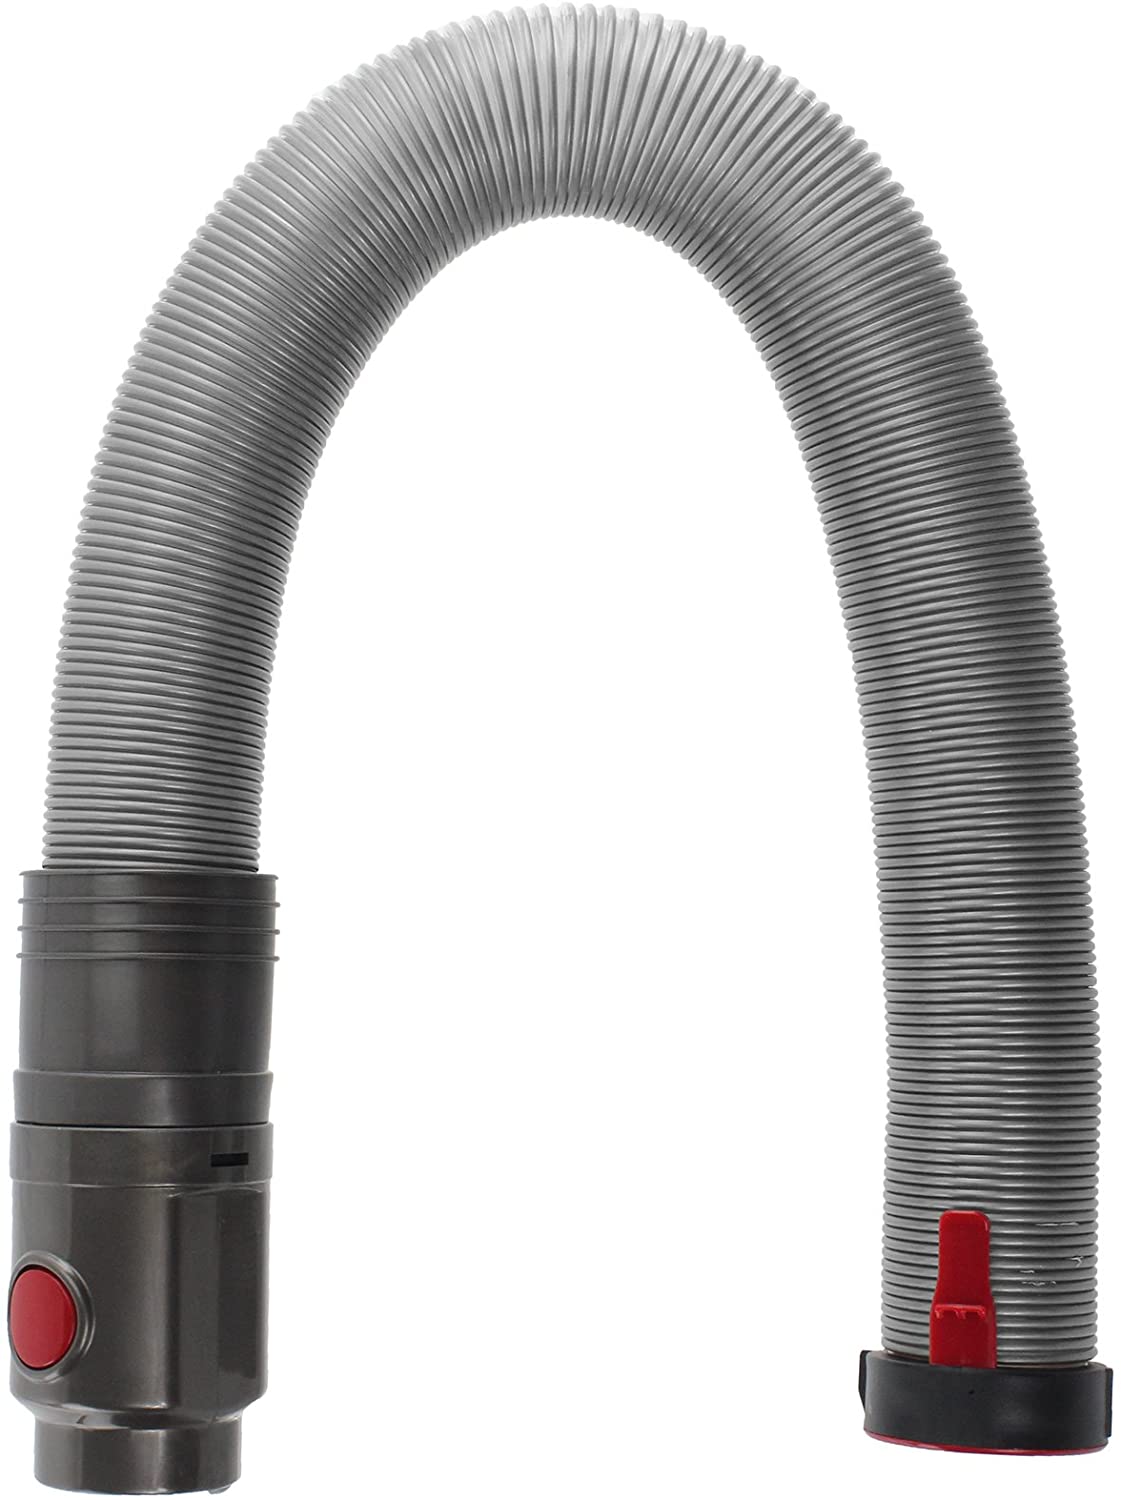 Stretch Hose for Dyson DC40 DC41 DC65 Vacuum Cleaner